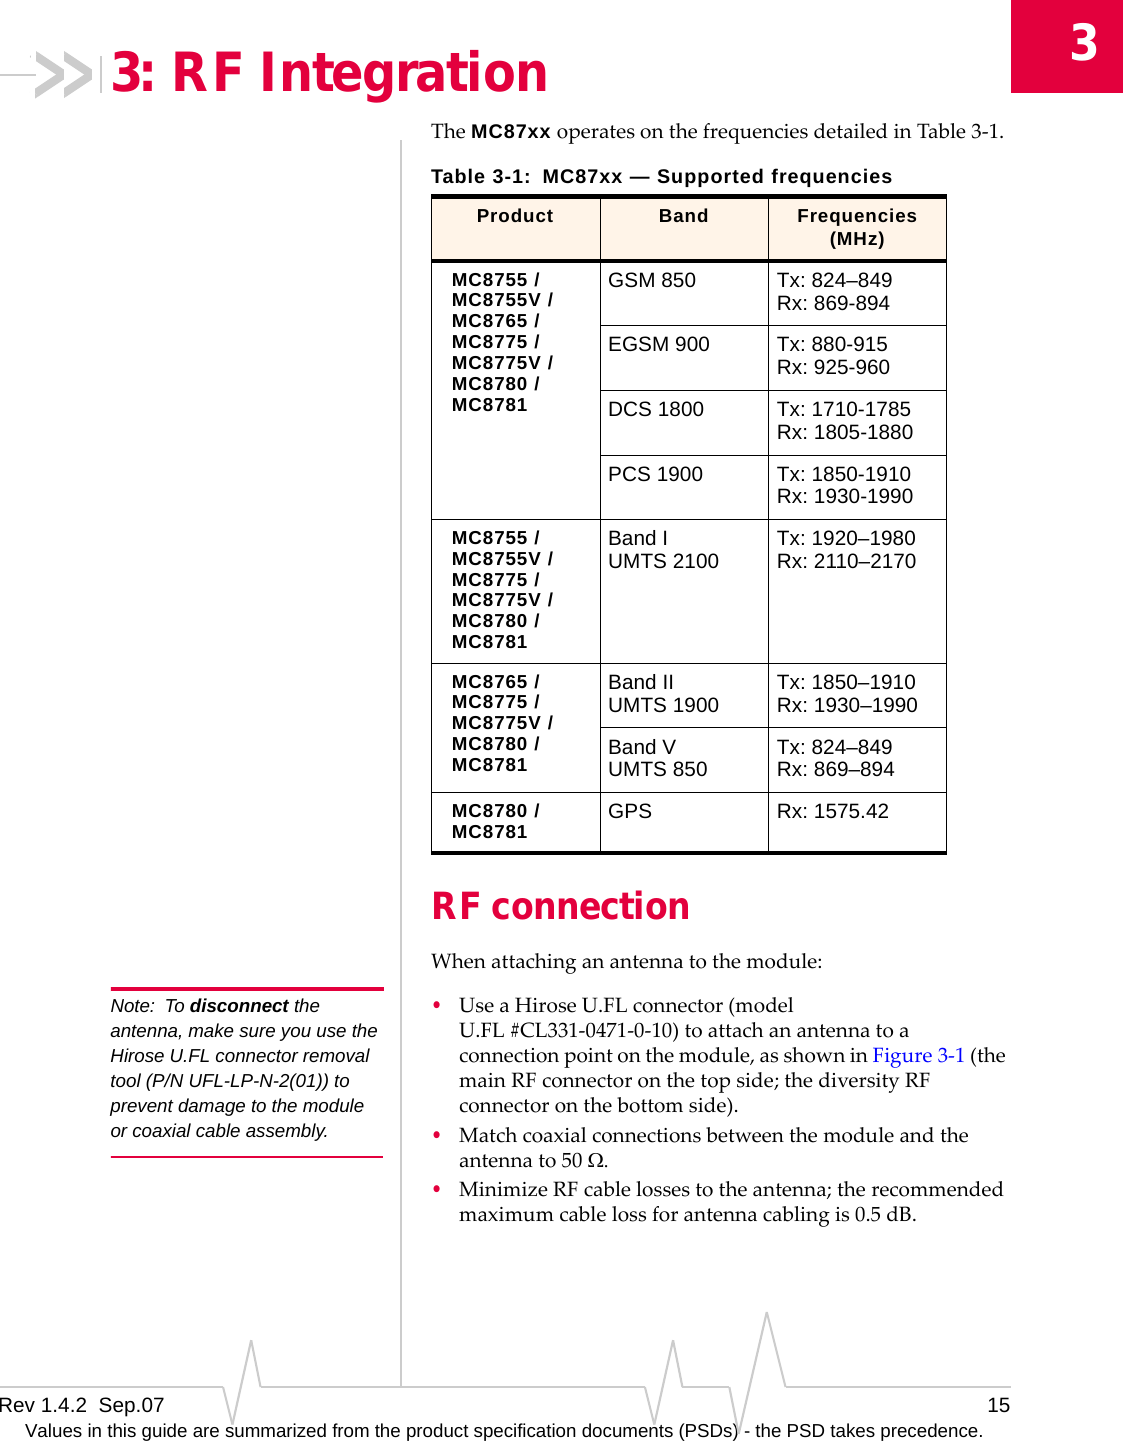 3Rev 1.4.2  Sep.07 15Values in this guide are summarized from the product specification documents (PSDs) - the PSD takes precedence.3: RF IntegrationTheMC87xxoperatesonthefrequenciesdetailedinTable 3‐1.RF connectionWhenattachinganantennatothemodule:Note: To disconnect the antenna, make sure you use the Hirose U.FL connector removal tool (P/N UFL-LP-N-2(01)) to prevent damage to the module or coaxial cable assembly.•UseaHiroseU.FLconnector(modelU.FL #CL331‐0471‐0‐10)toattachanantennatoaconnectionpointonthemodule,asshowninFigure 3‐1(themainRFconnectoronthetopside;thediversityRFconnectoronthebottomside).•Matchcoaxialconnectionsbetweenthemoduleandtheantennato50 Ω.•MinimizeRFcablelossestotheantenna;therecommendedmaximumcablelossforantennacablingis0.5 dB.Table 3-1: MC87xx — Supported frequenciesProduct Band Frequencies (MHz)MC8755 /MC8755V /MC8765 /MC8775 /MC8775V /MC8780 /MC8781GSM 850 Tx: 824–849Rx: 869-894EGSM 900 Tx: 880-915Rx: 925-960DCS 1800 Tx: 1710-1785Rx: 1805-1880PCS 1900 Tx: 1850-1910Rx: 1930-1990MC8755 /MC8755V /MC8775 /MC8775V /MC8780 /MC8781Band IUMTS 2100 Tx: 1920–1980Rx: 2110–2170MC8765 /MC8775 /MC8775V /MC8780 /MC8781Band IIUMTS 1900 Tx: 1850–1910Rx: 1930–1990Band VUMTS 850 Tx: 824–849Rx: 869–894MC8780 /MC8781 GPS Rx: 1575.42